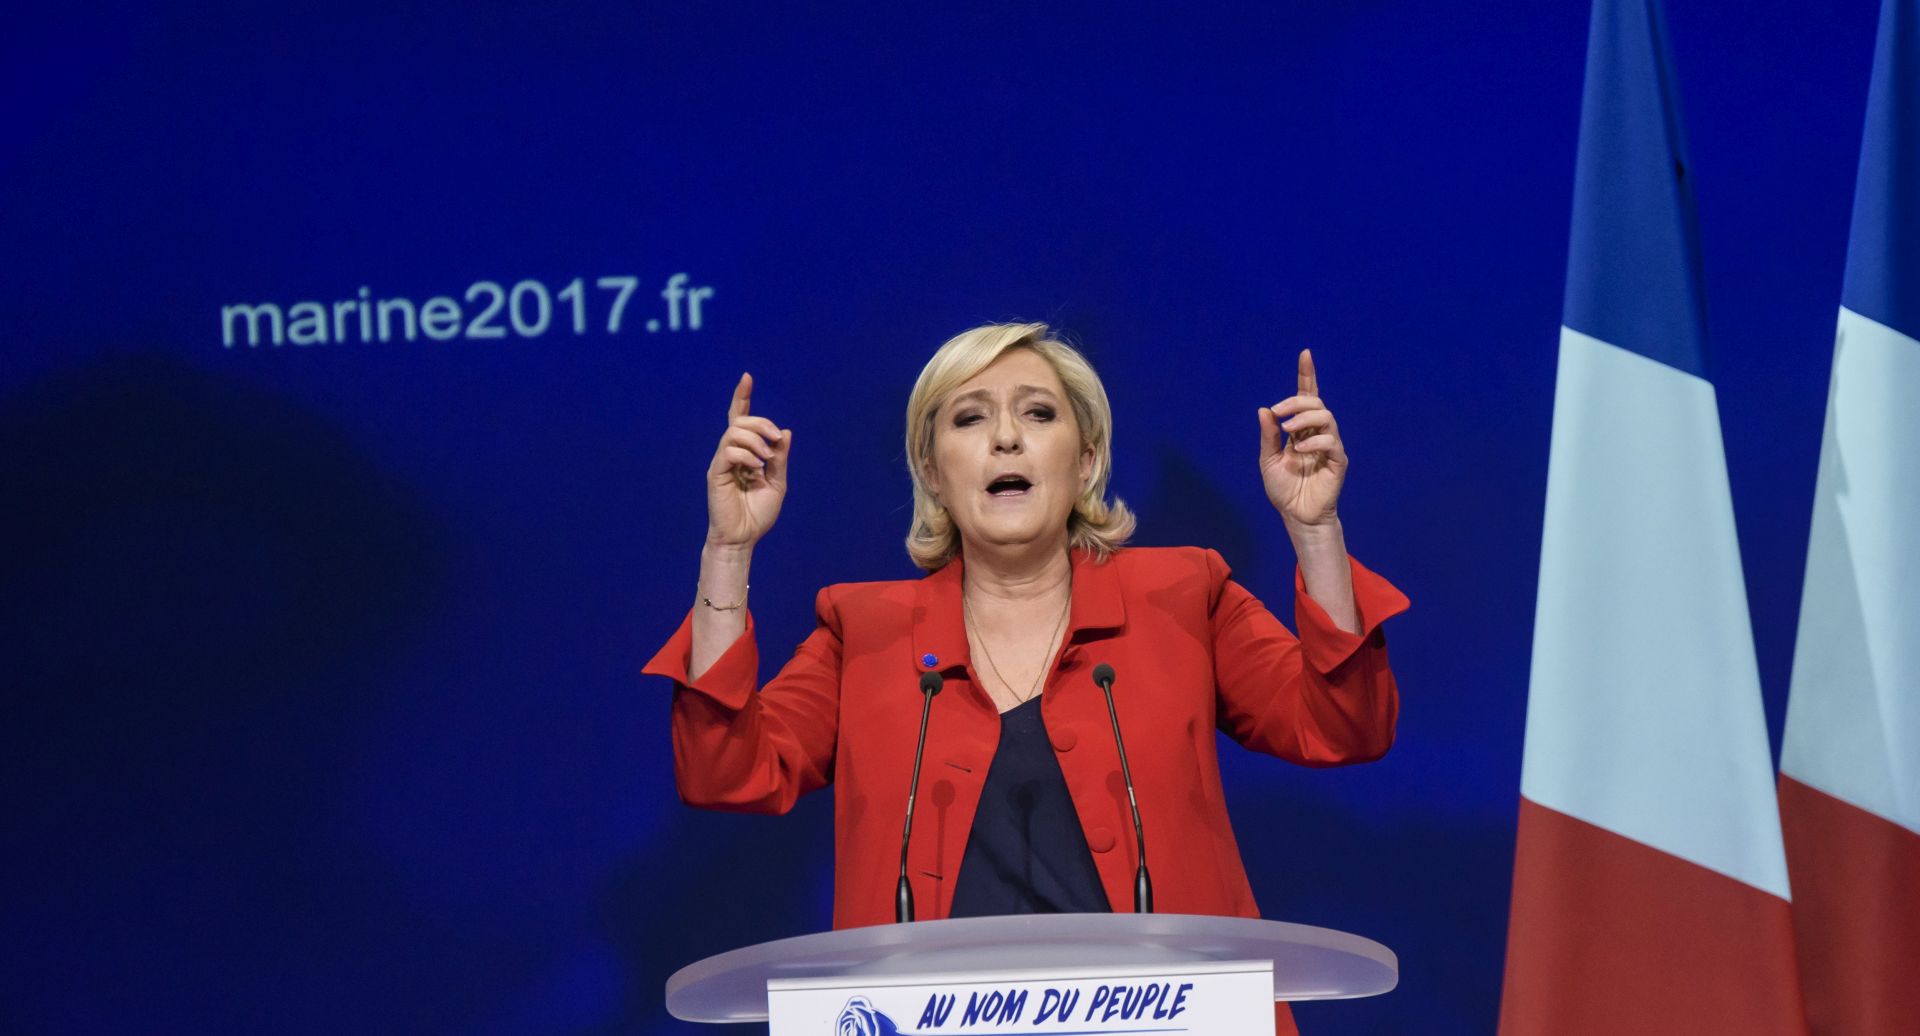 epa05912869 Marine Le Pen, French National Front (FN) political party leader and candidate for French 2017 presidential election, delivers a speech during an election campaign rally in Paris, France, 17 April 2017. France holds the first round of the 2017 presidential elections on 23 April 2017.  EPA/CHRISTOPHE PETIT TESSON